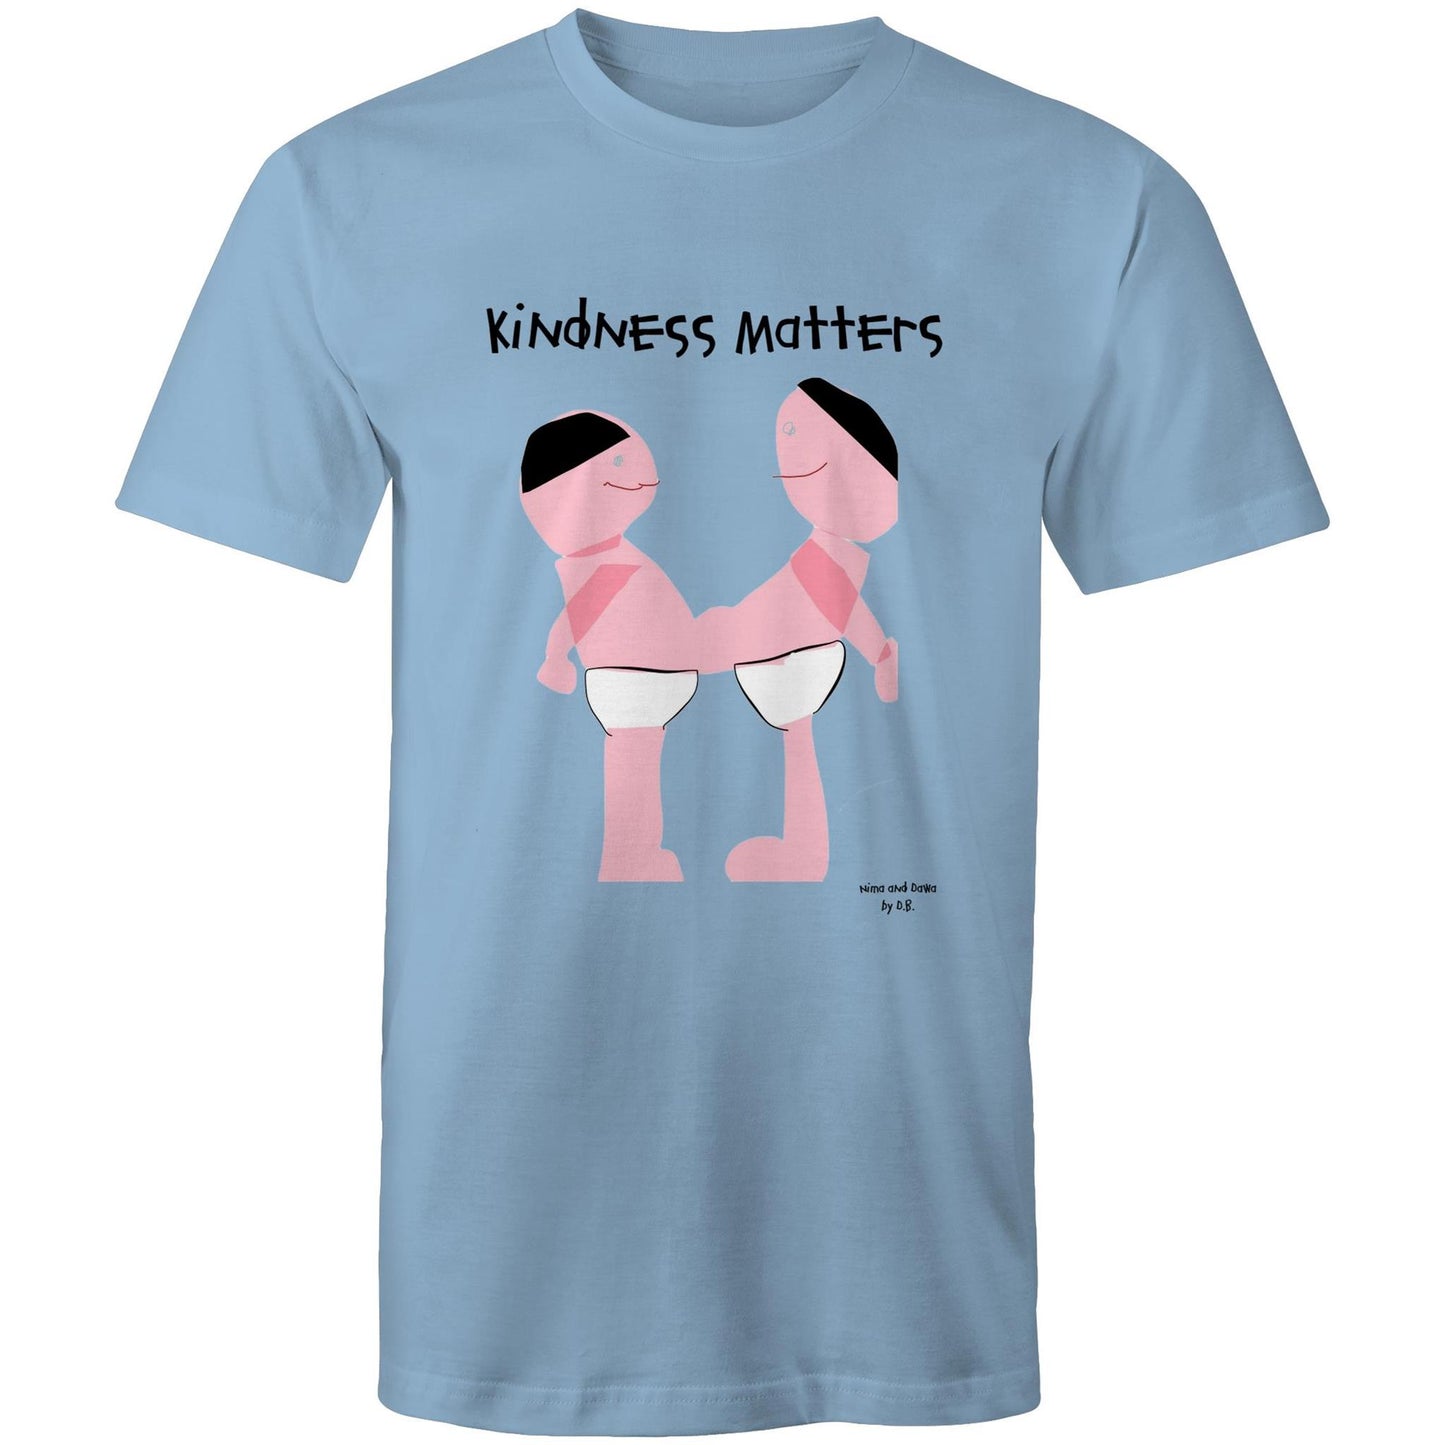 Kindness Matters front and back printed Tee, Nima and Dawa by DB Art printed on Unisex Softstyle T-Shirt